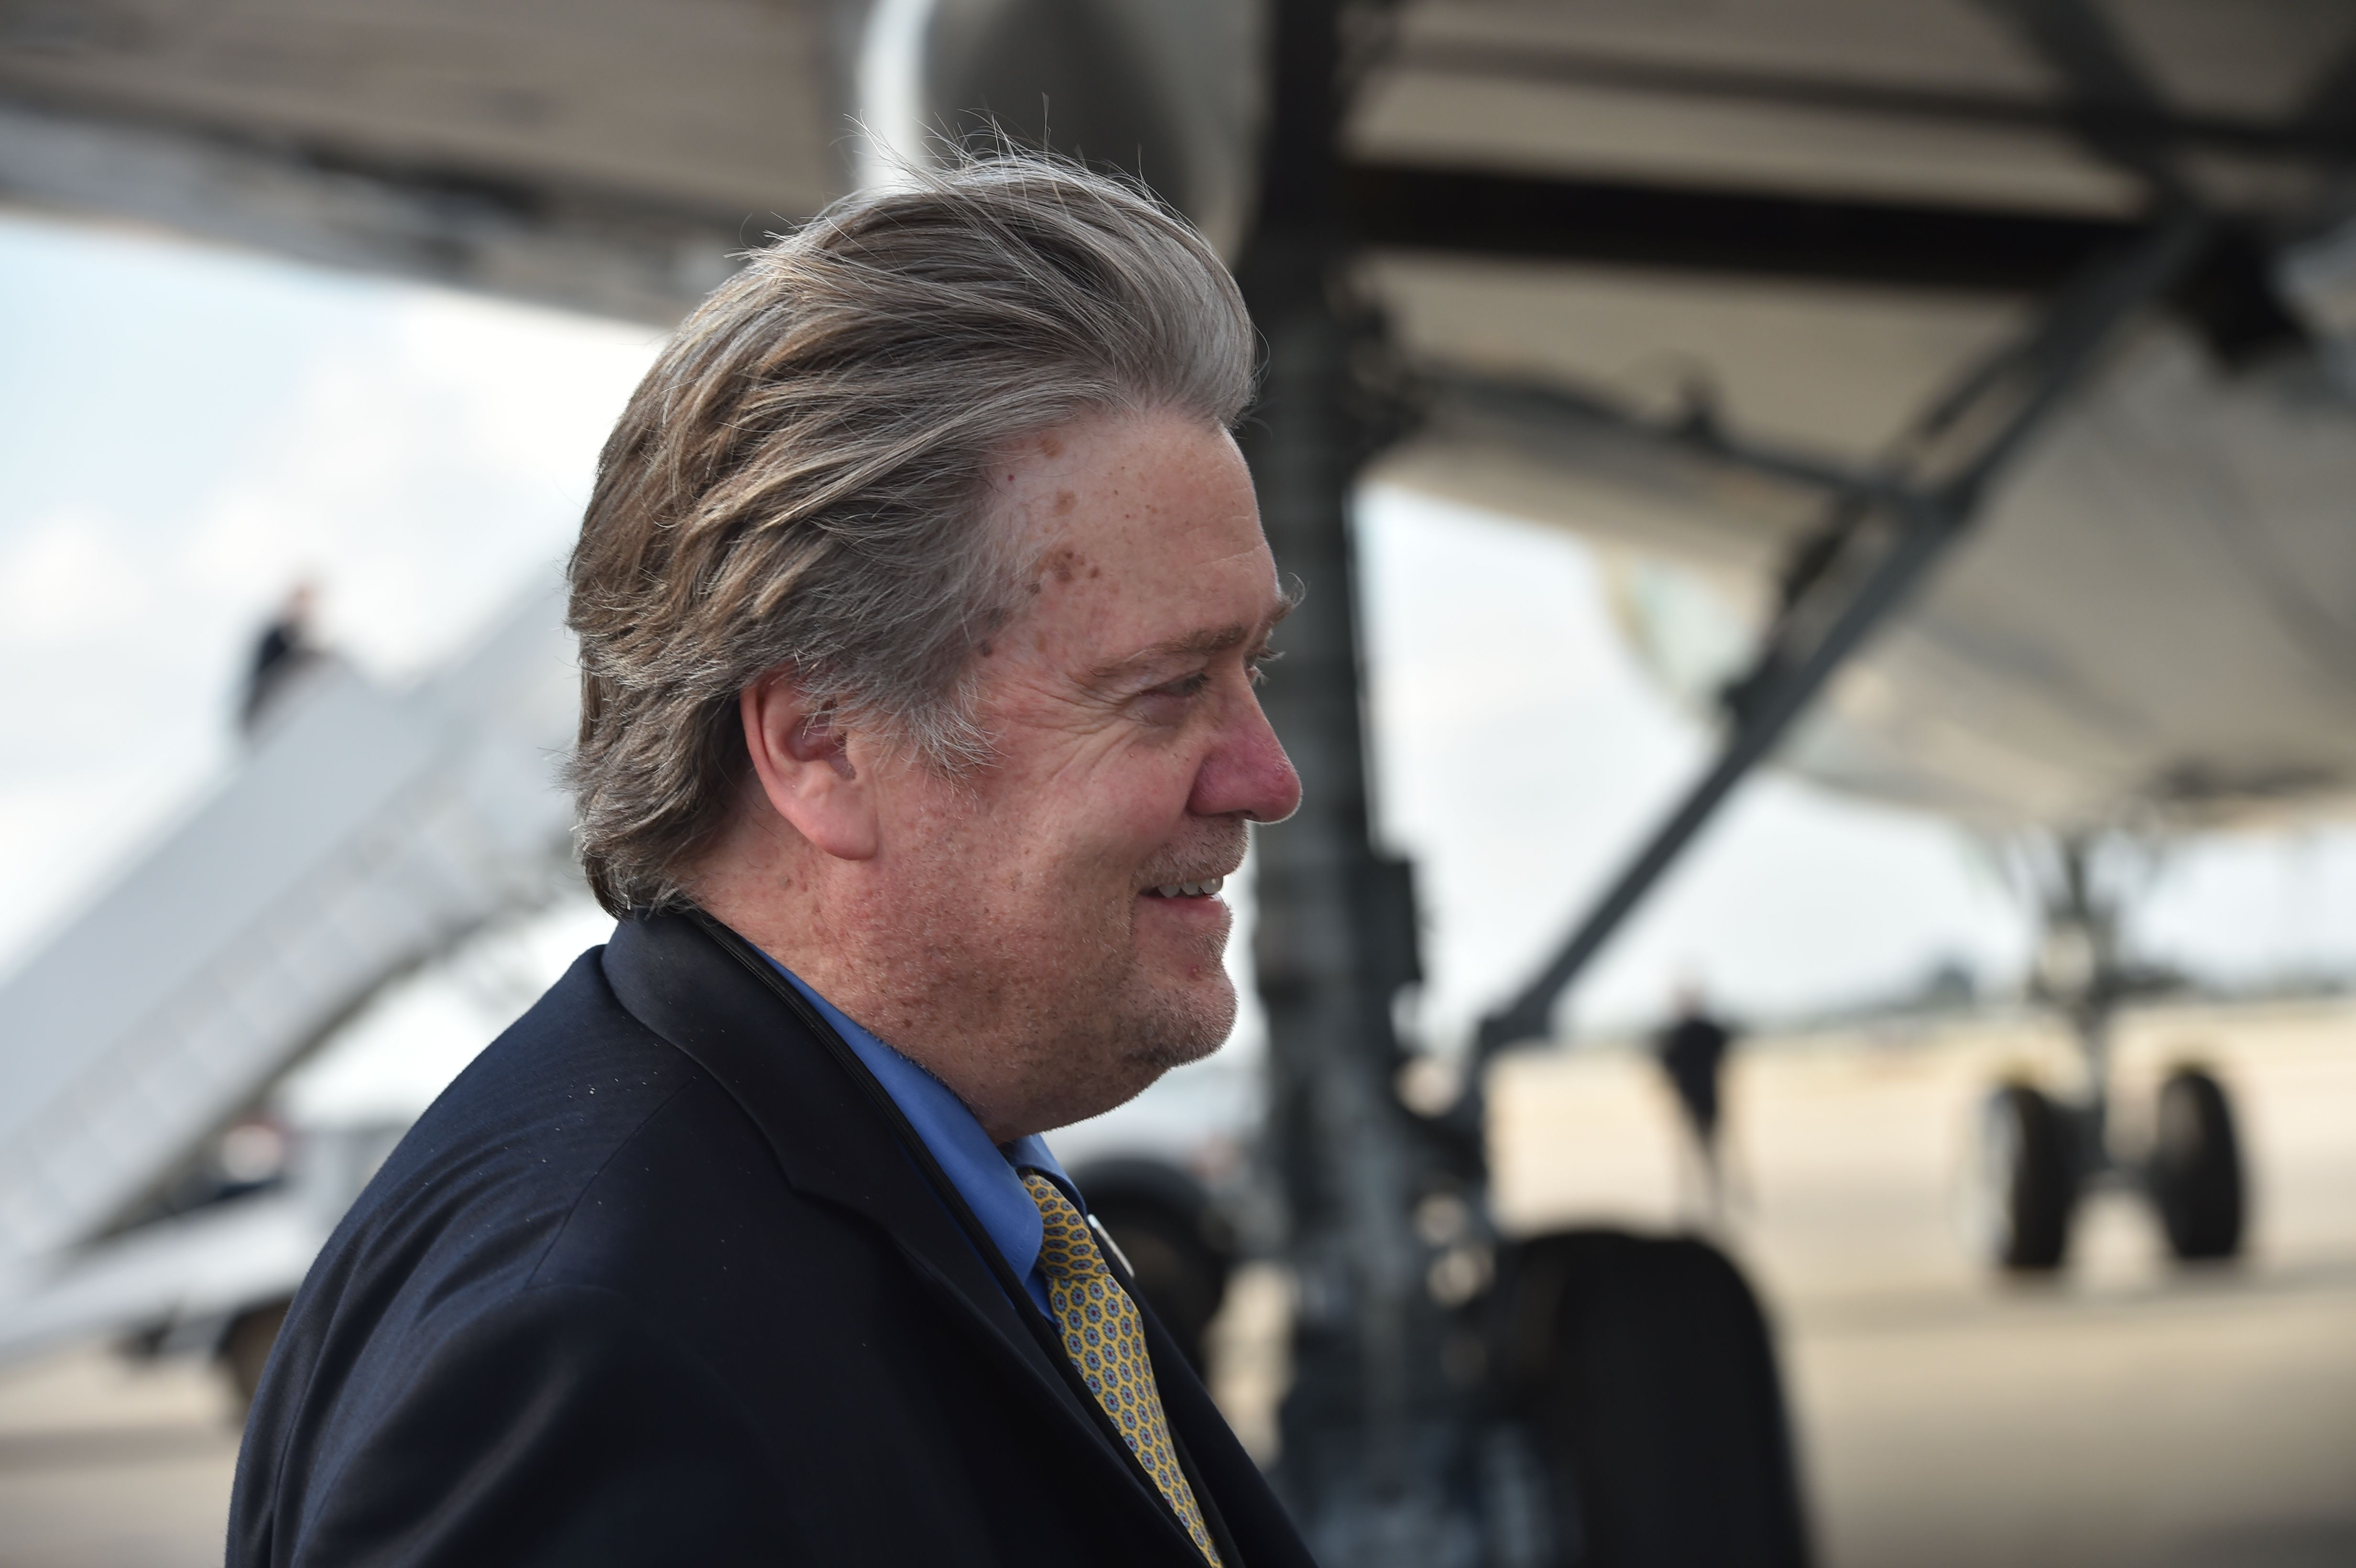 Bannon delivered EU-sceptic message before Pence visit